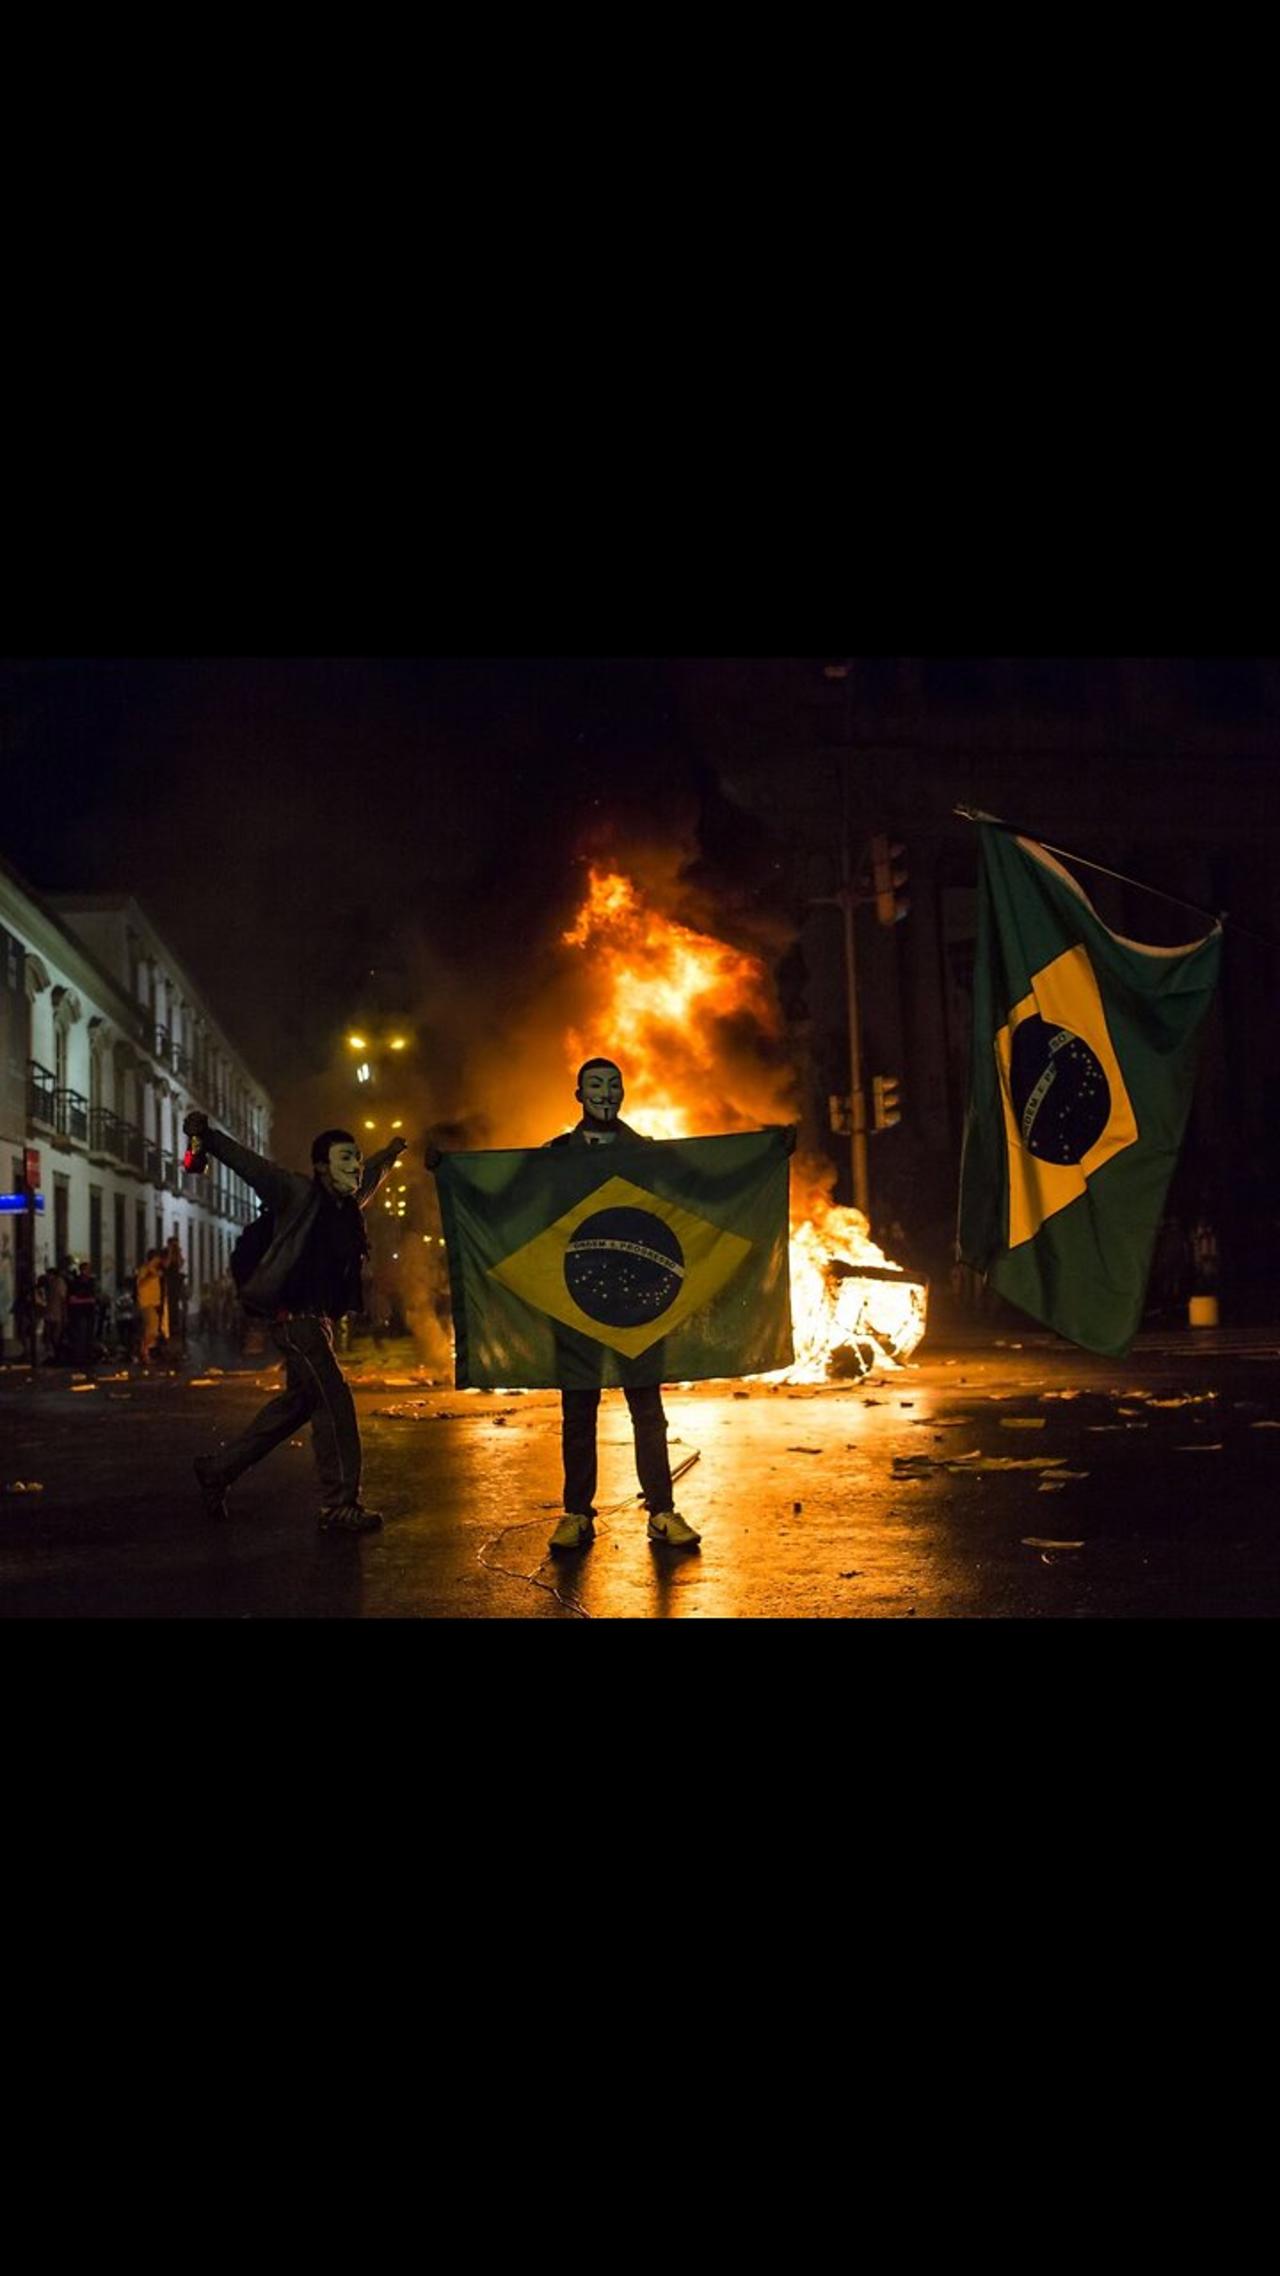 BRAZIL IS COLLAPSING WHILE WE WATCH - VID 1